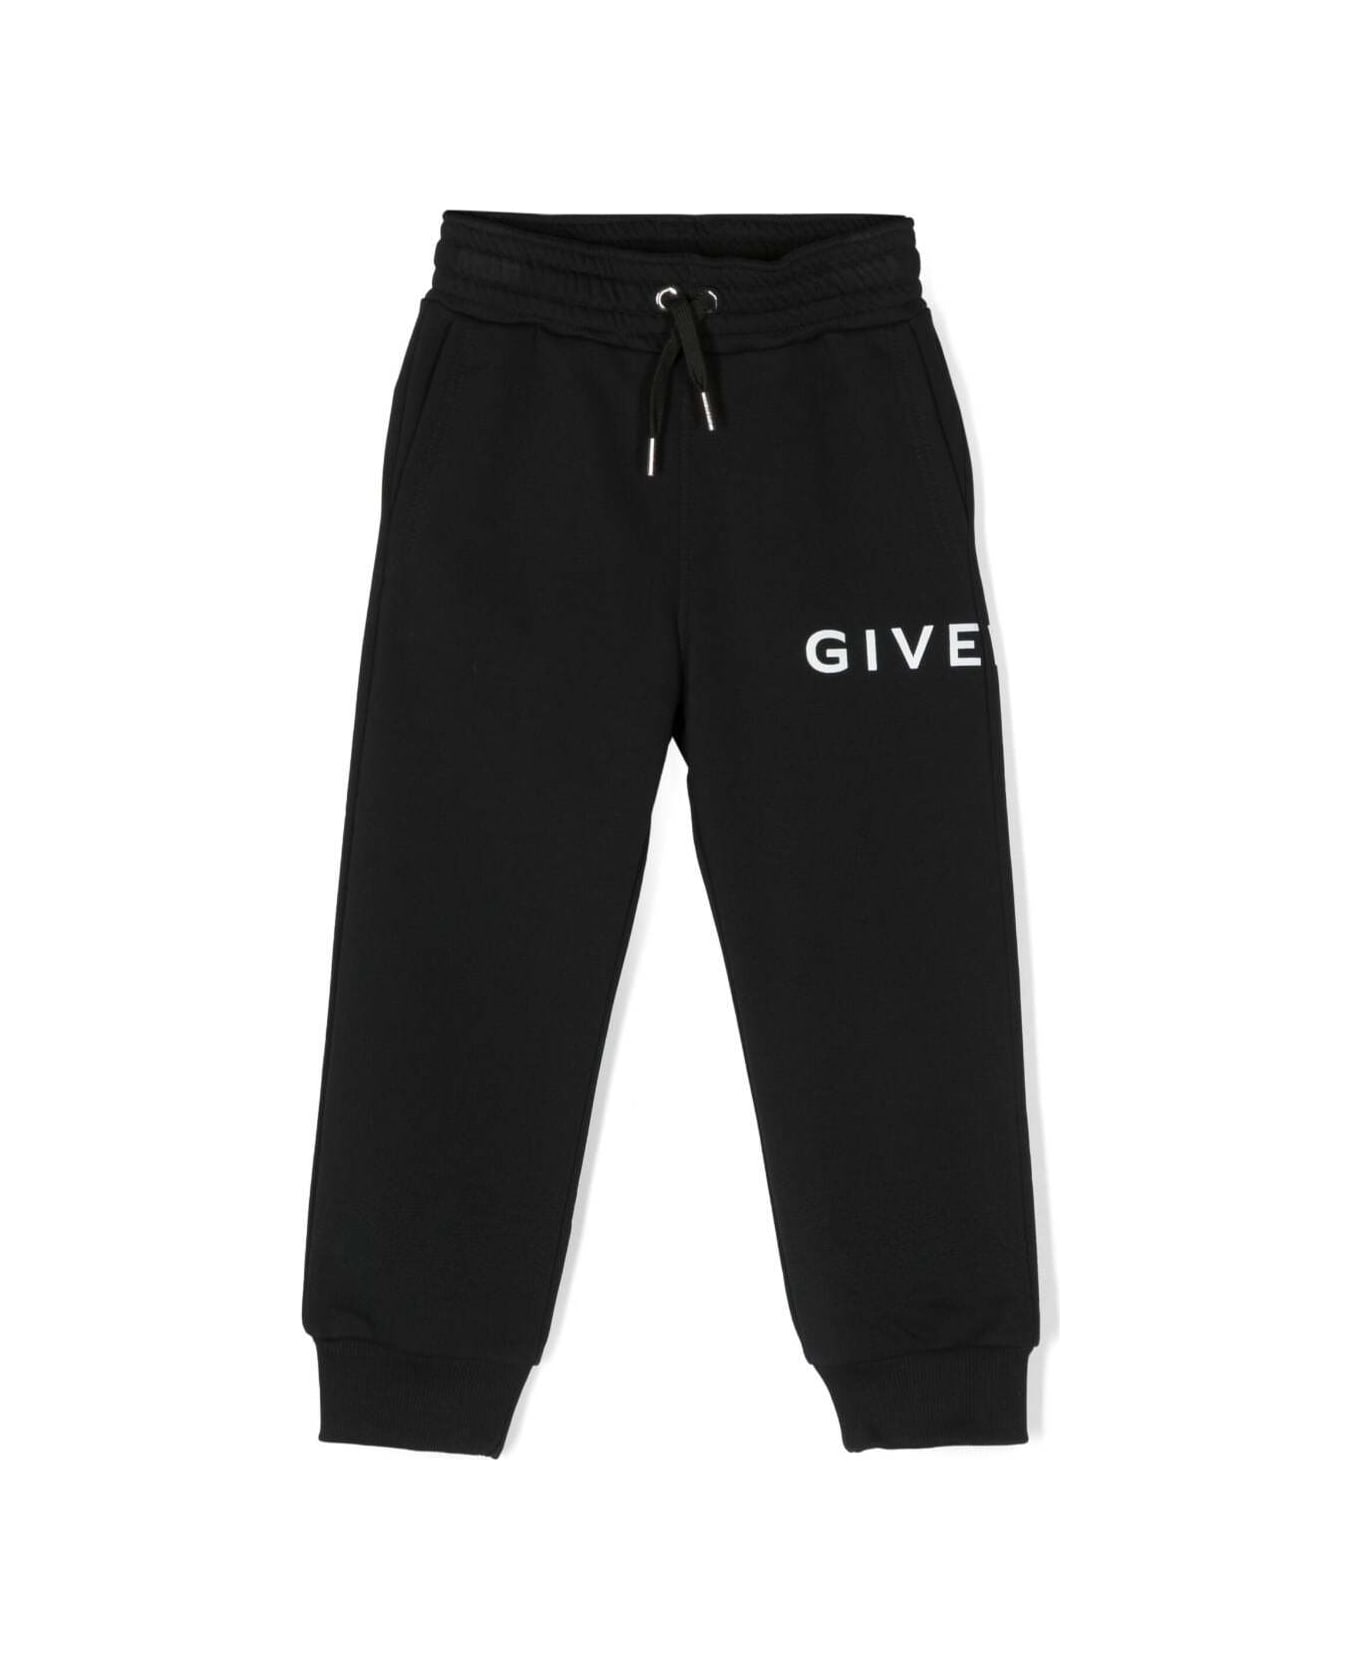 Givenchy Black Track Pants Withy Contrasting Logo Print In Cotton Boy - Black